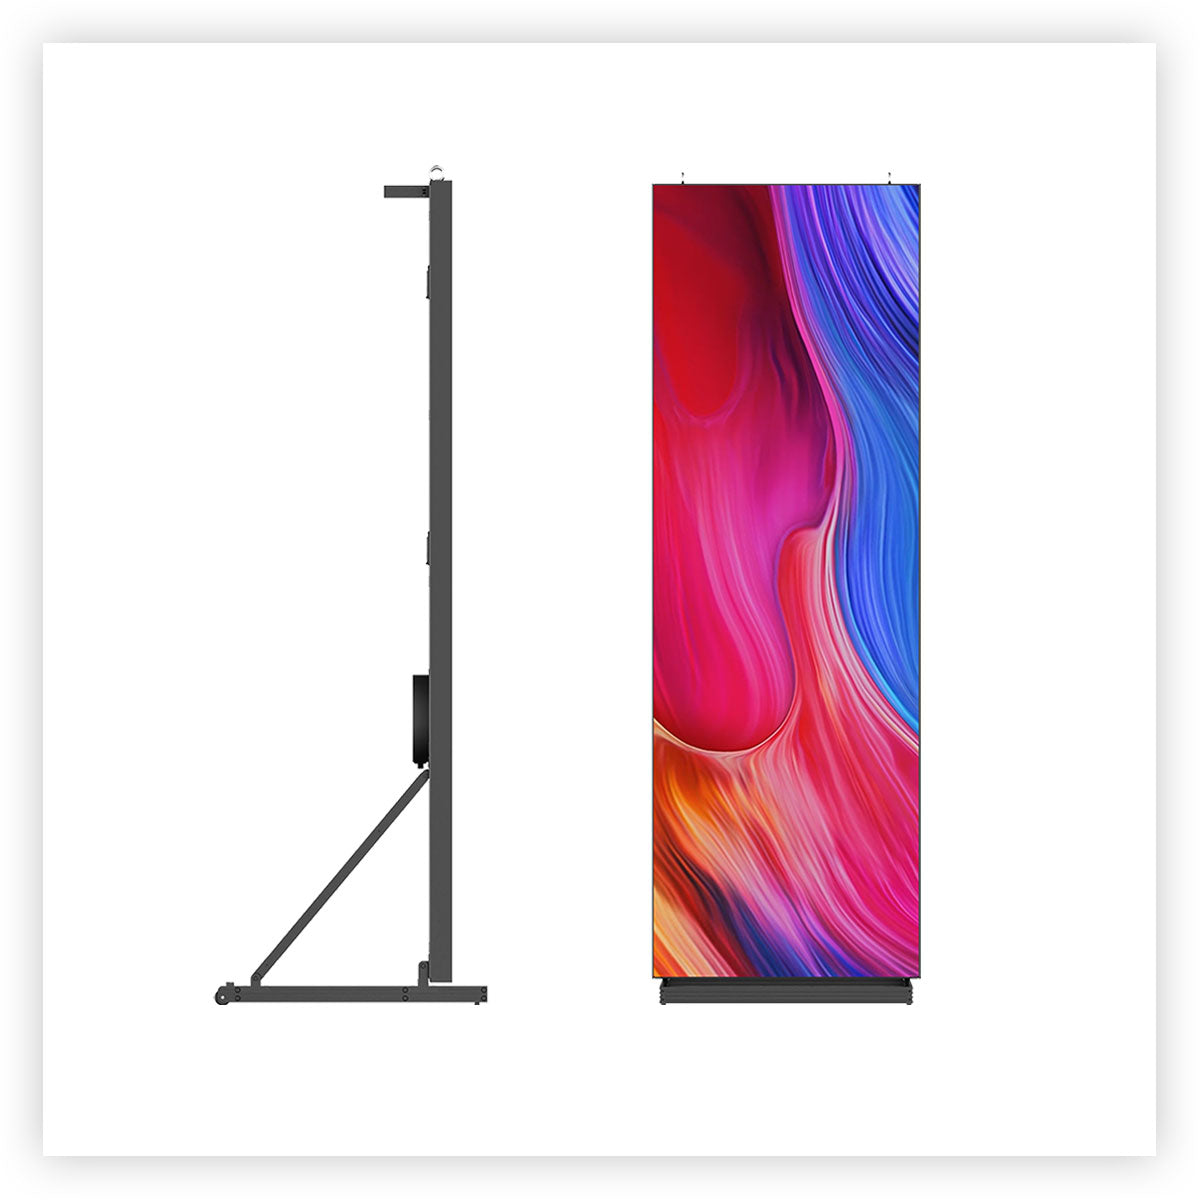 AdSpire Indoor LED Poster 25.2"x75.6" P3.076mm